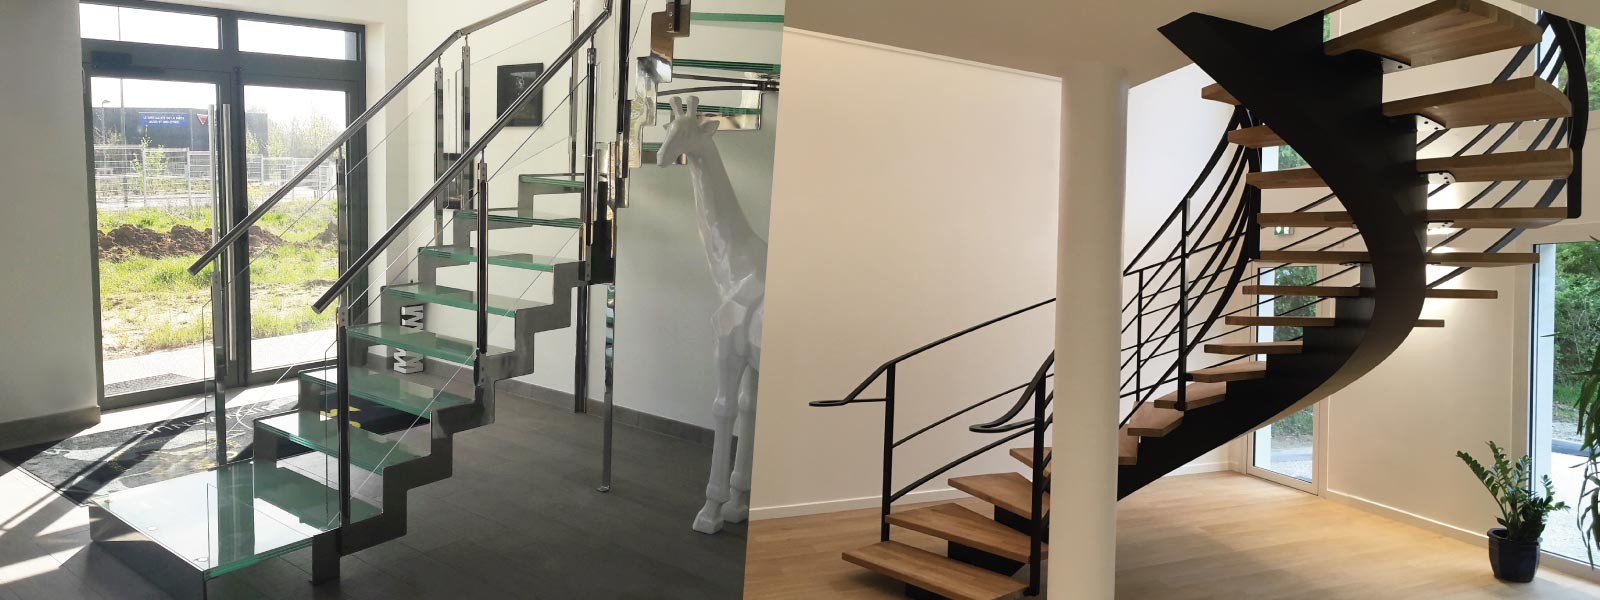 Metallic stairs and wooden stairs. Oeba is a manufacturer and installer of stairs in wood and steel.